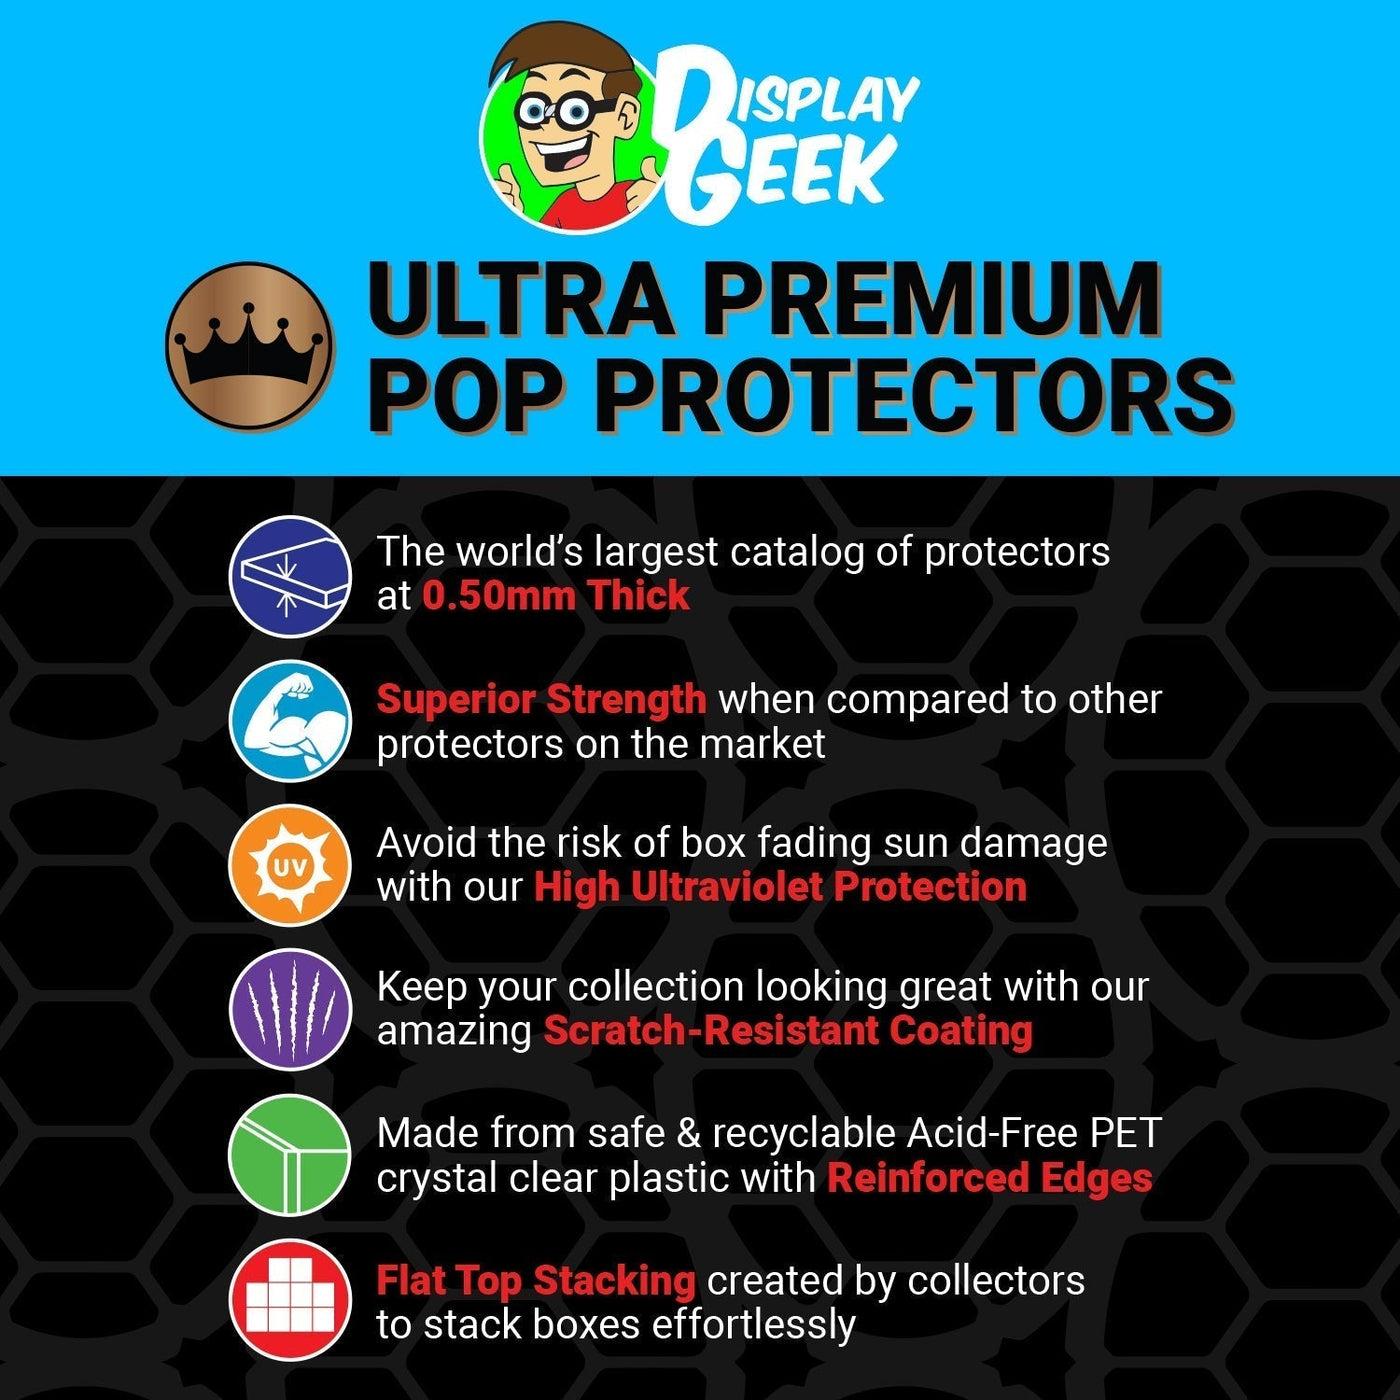 Pop Protector for Damian Lillard #14 Funko Pop Magazine Covers on The Protector Guide App by Display Geek